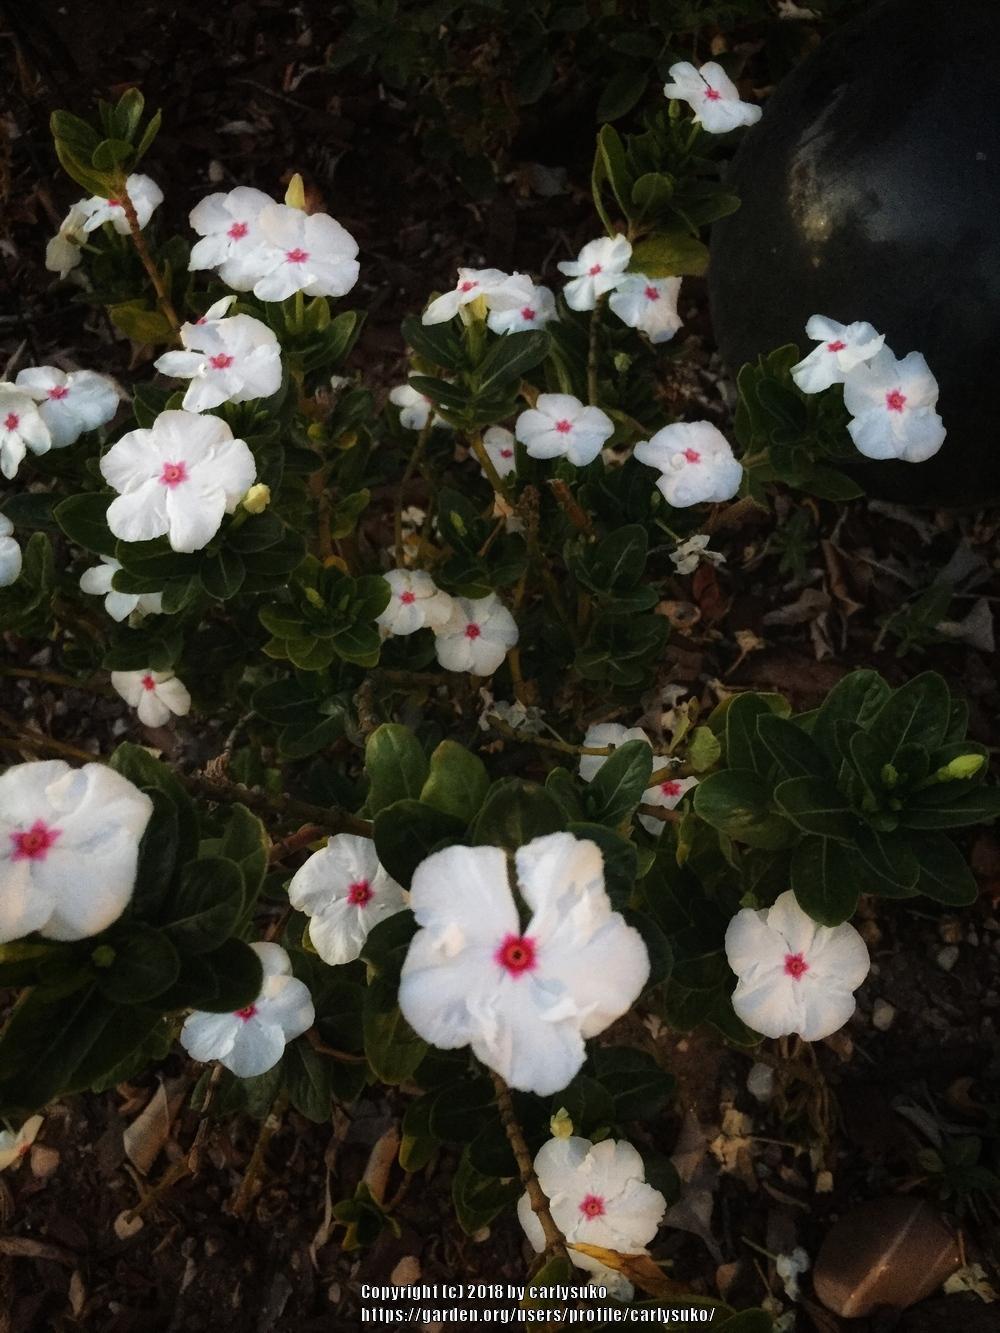 Photo of Madagascar Periwinkle (Catharanthus roseus 'Pacifica Polka Dot') uploaded by carlysuko